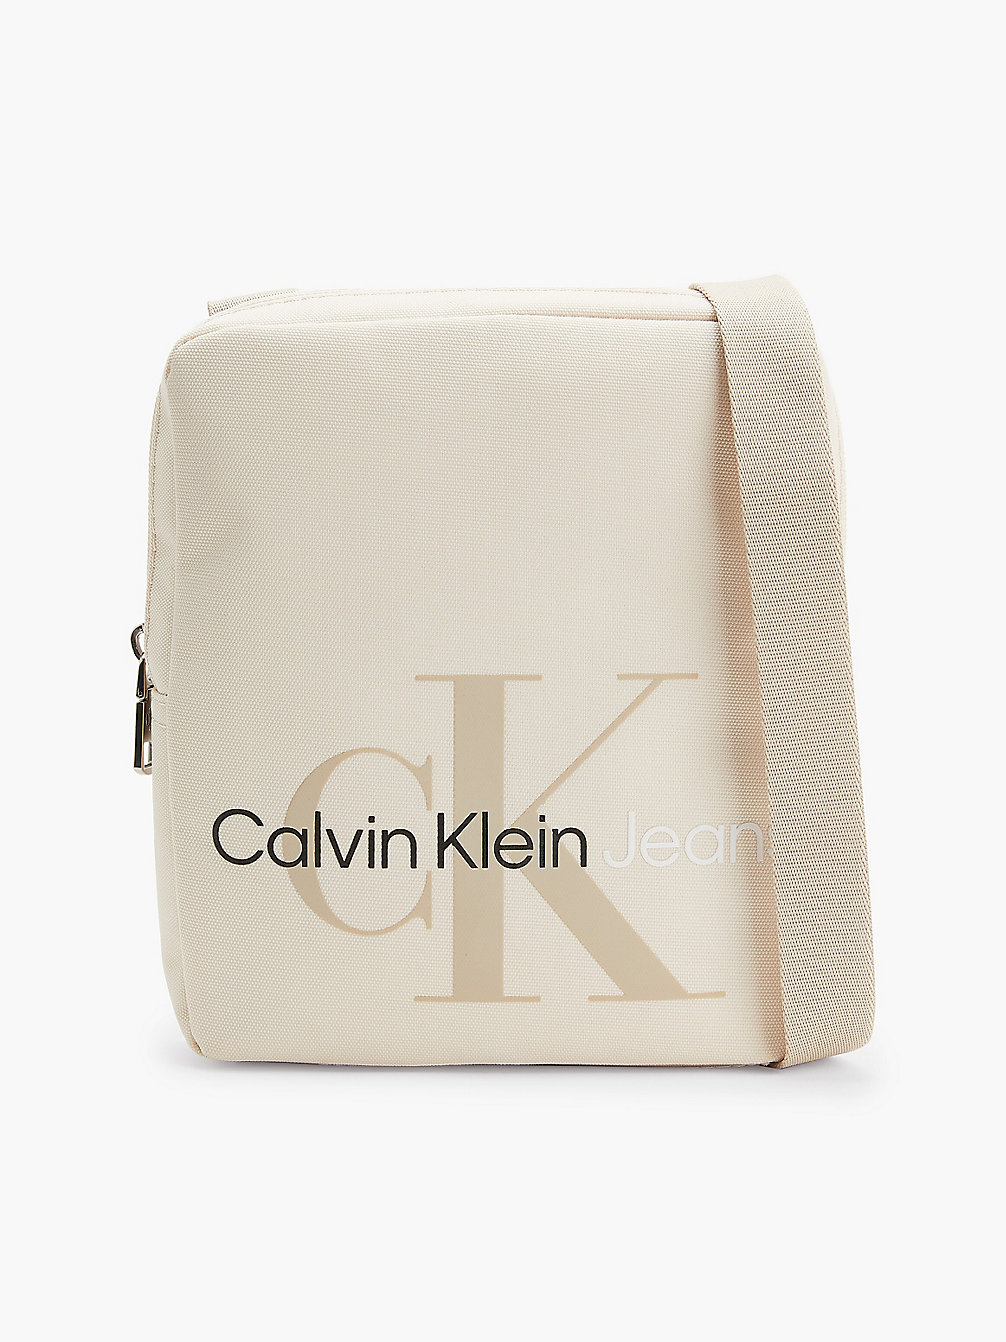 TUSCAN BEIGE Recycled Polyester Crossbody Bag undefined men Calvin Klein